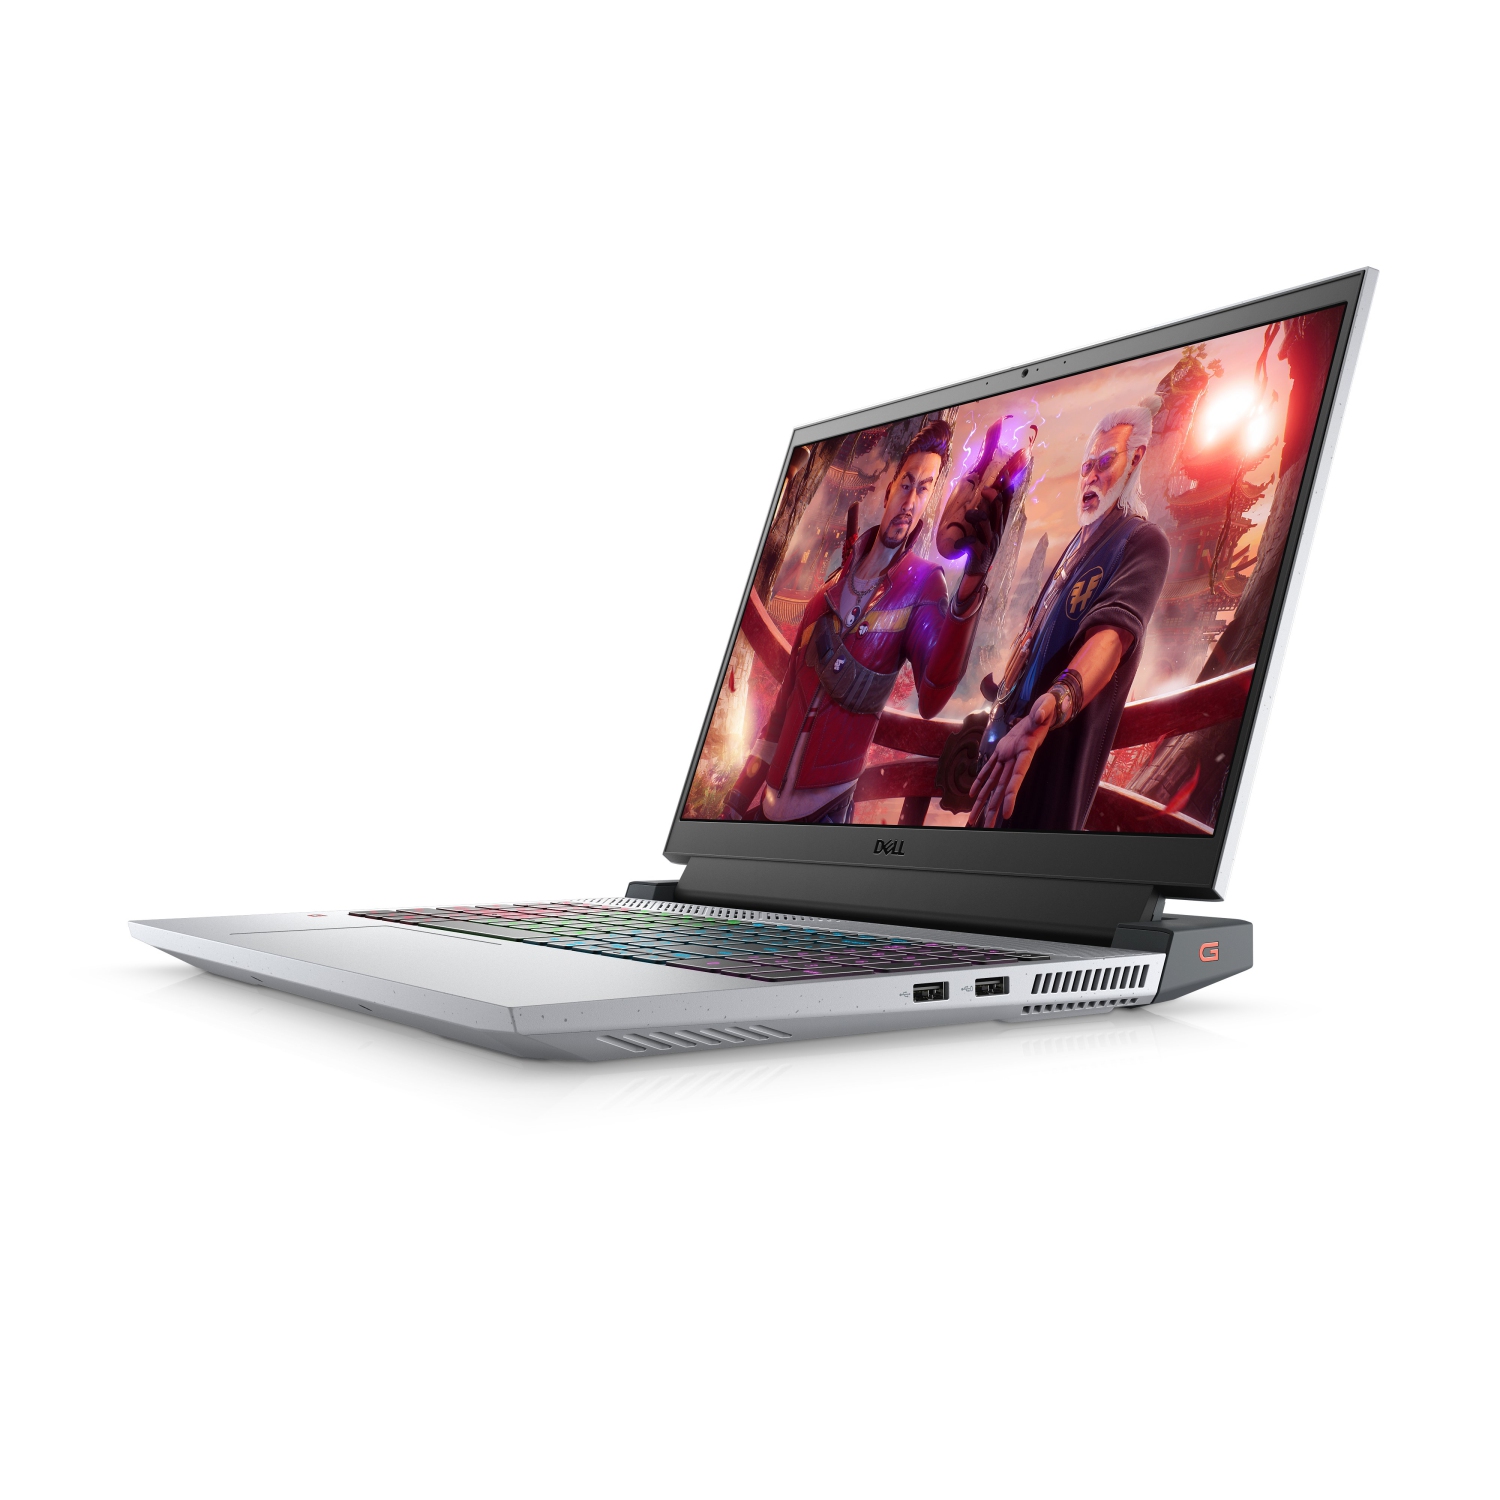 Refurbished (Excellent) - Dell G15 5515 Gaming Laptop (2021) | 15.6" FHD | Core Ryzen 7 - 256GB SSD - 8GB RAM - RTX 3050 | 8 Cores @ 4.4 GHz Certified Refurbished